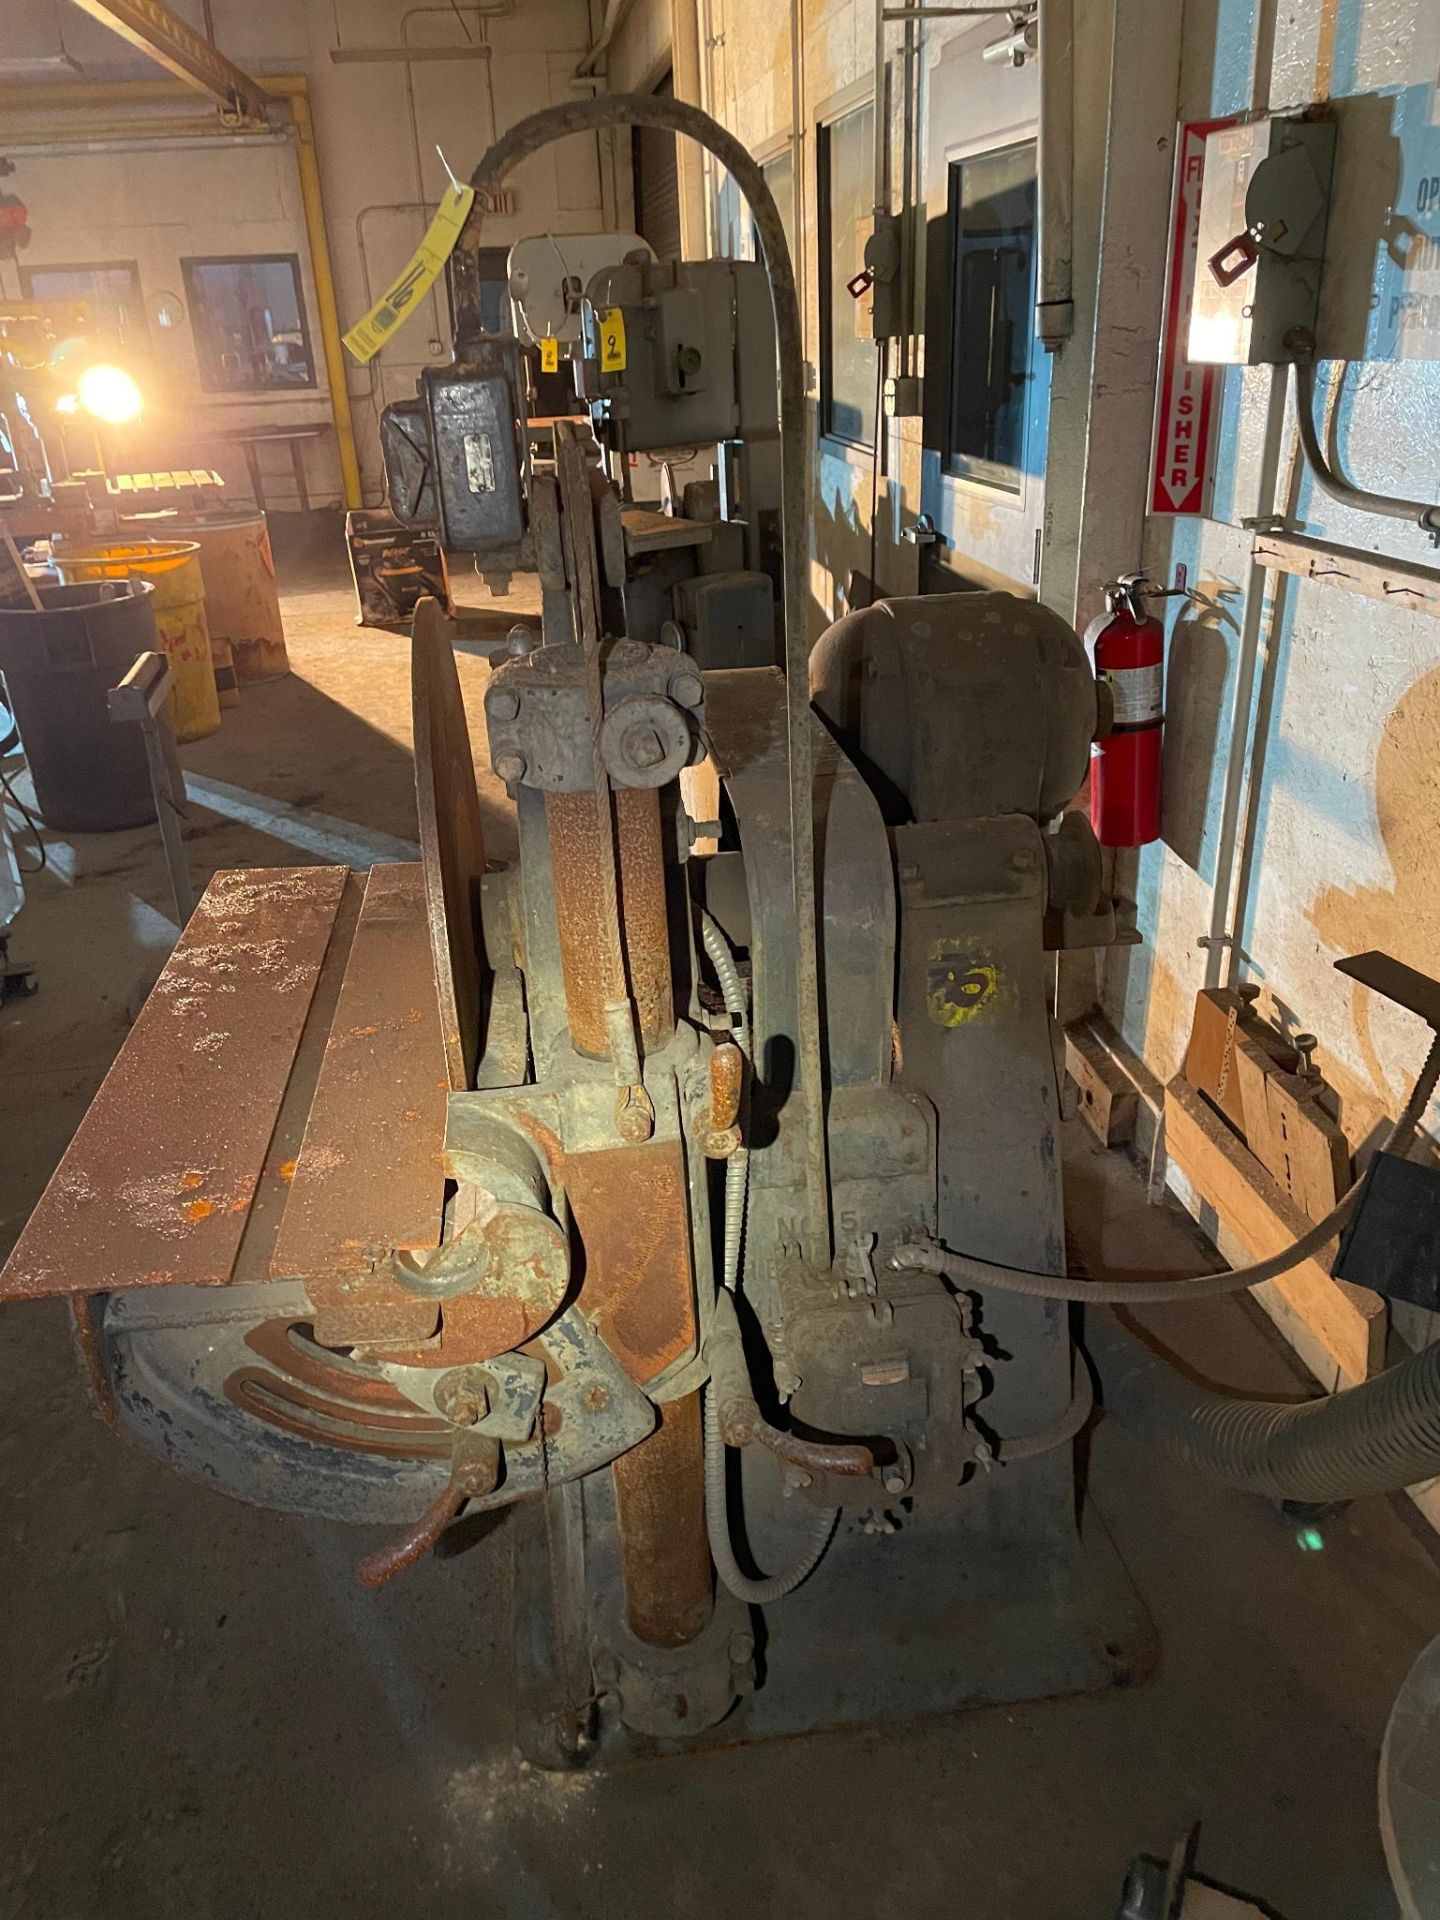 DISC SANDER, MFG. UNKNOWN, 24", 480 v., w/ dust collection - Image 2 of 5